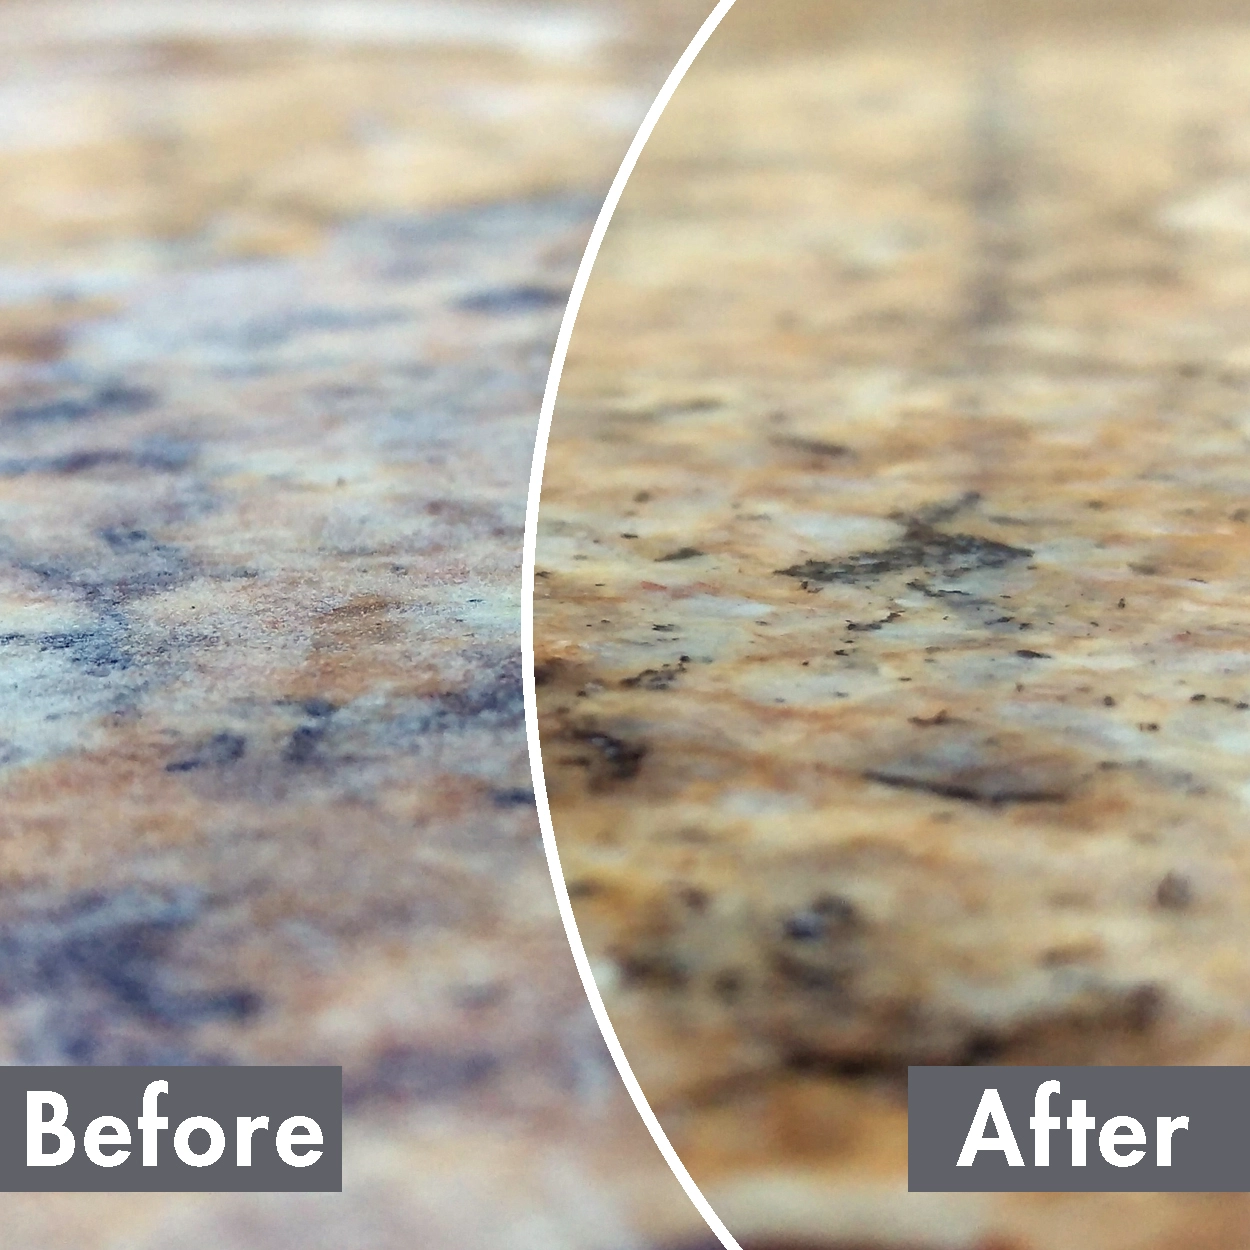 On the left, a photo of a granite counter top before N-Hance refinishing. On the right, a photo of a granite counter top after N-Hance refinishing work.